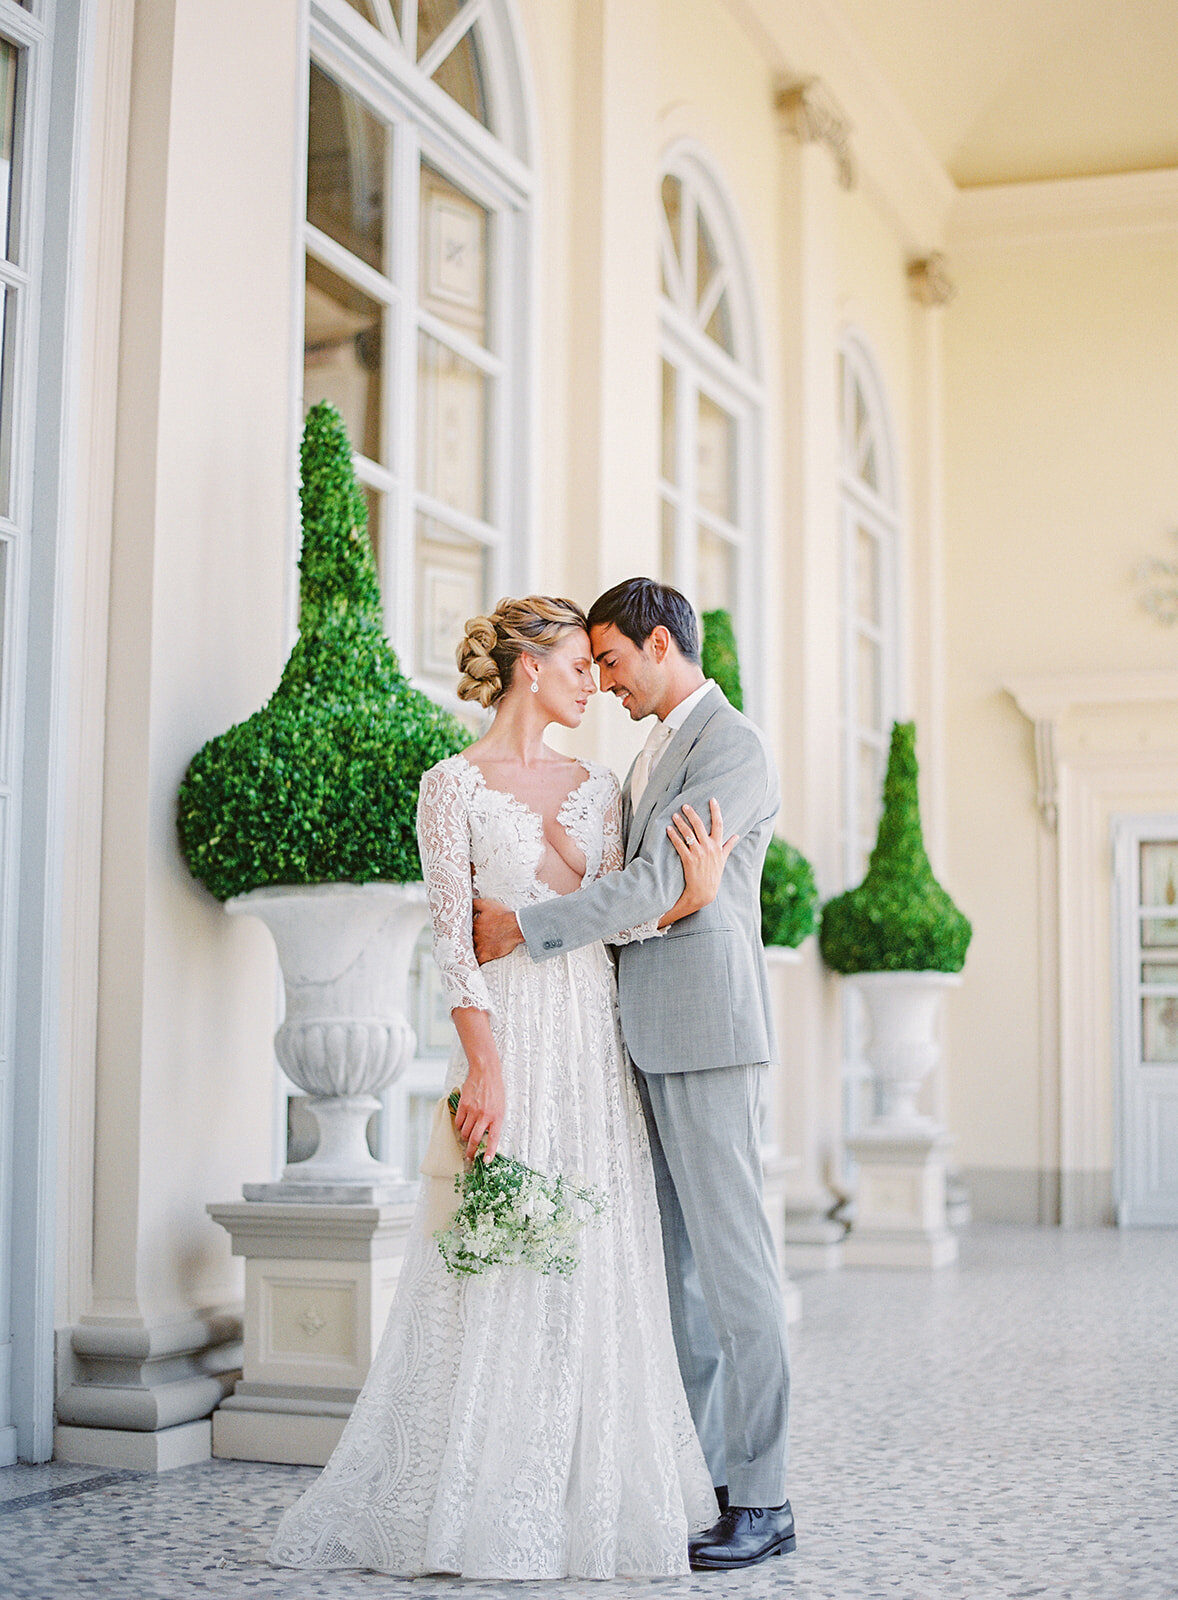 Bride and groom on the veranda of the villa, holding each other. Photographed by Amy Mulder Photography.